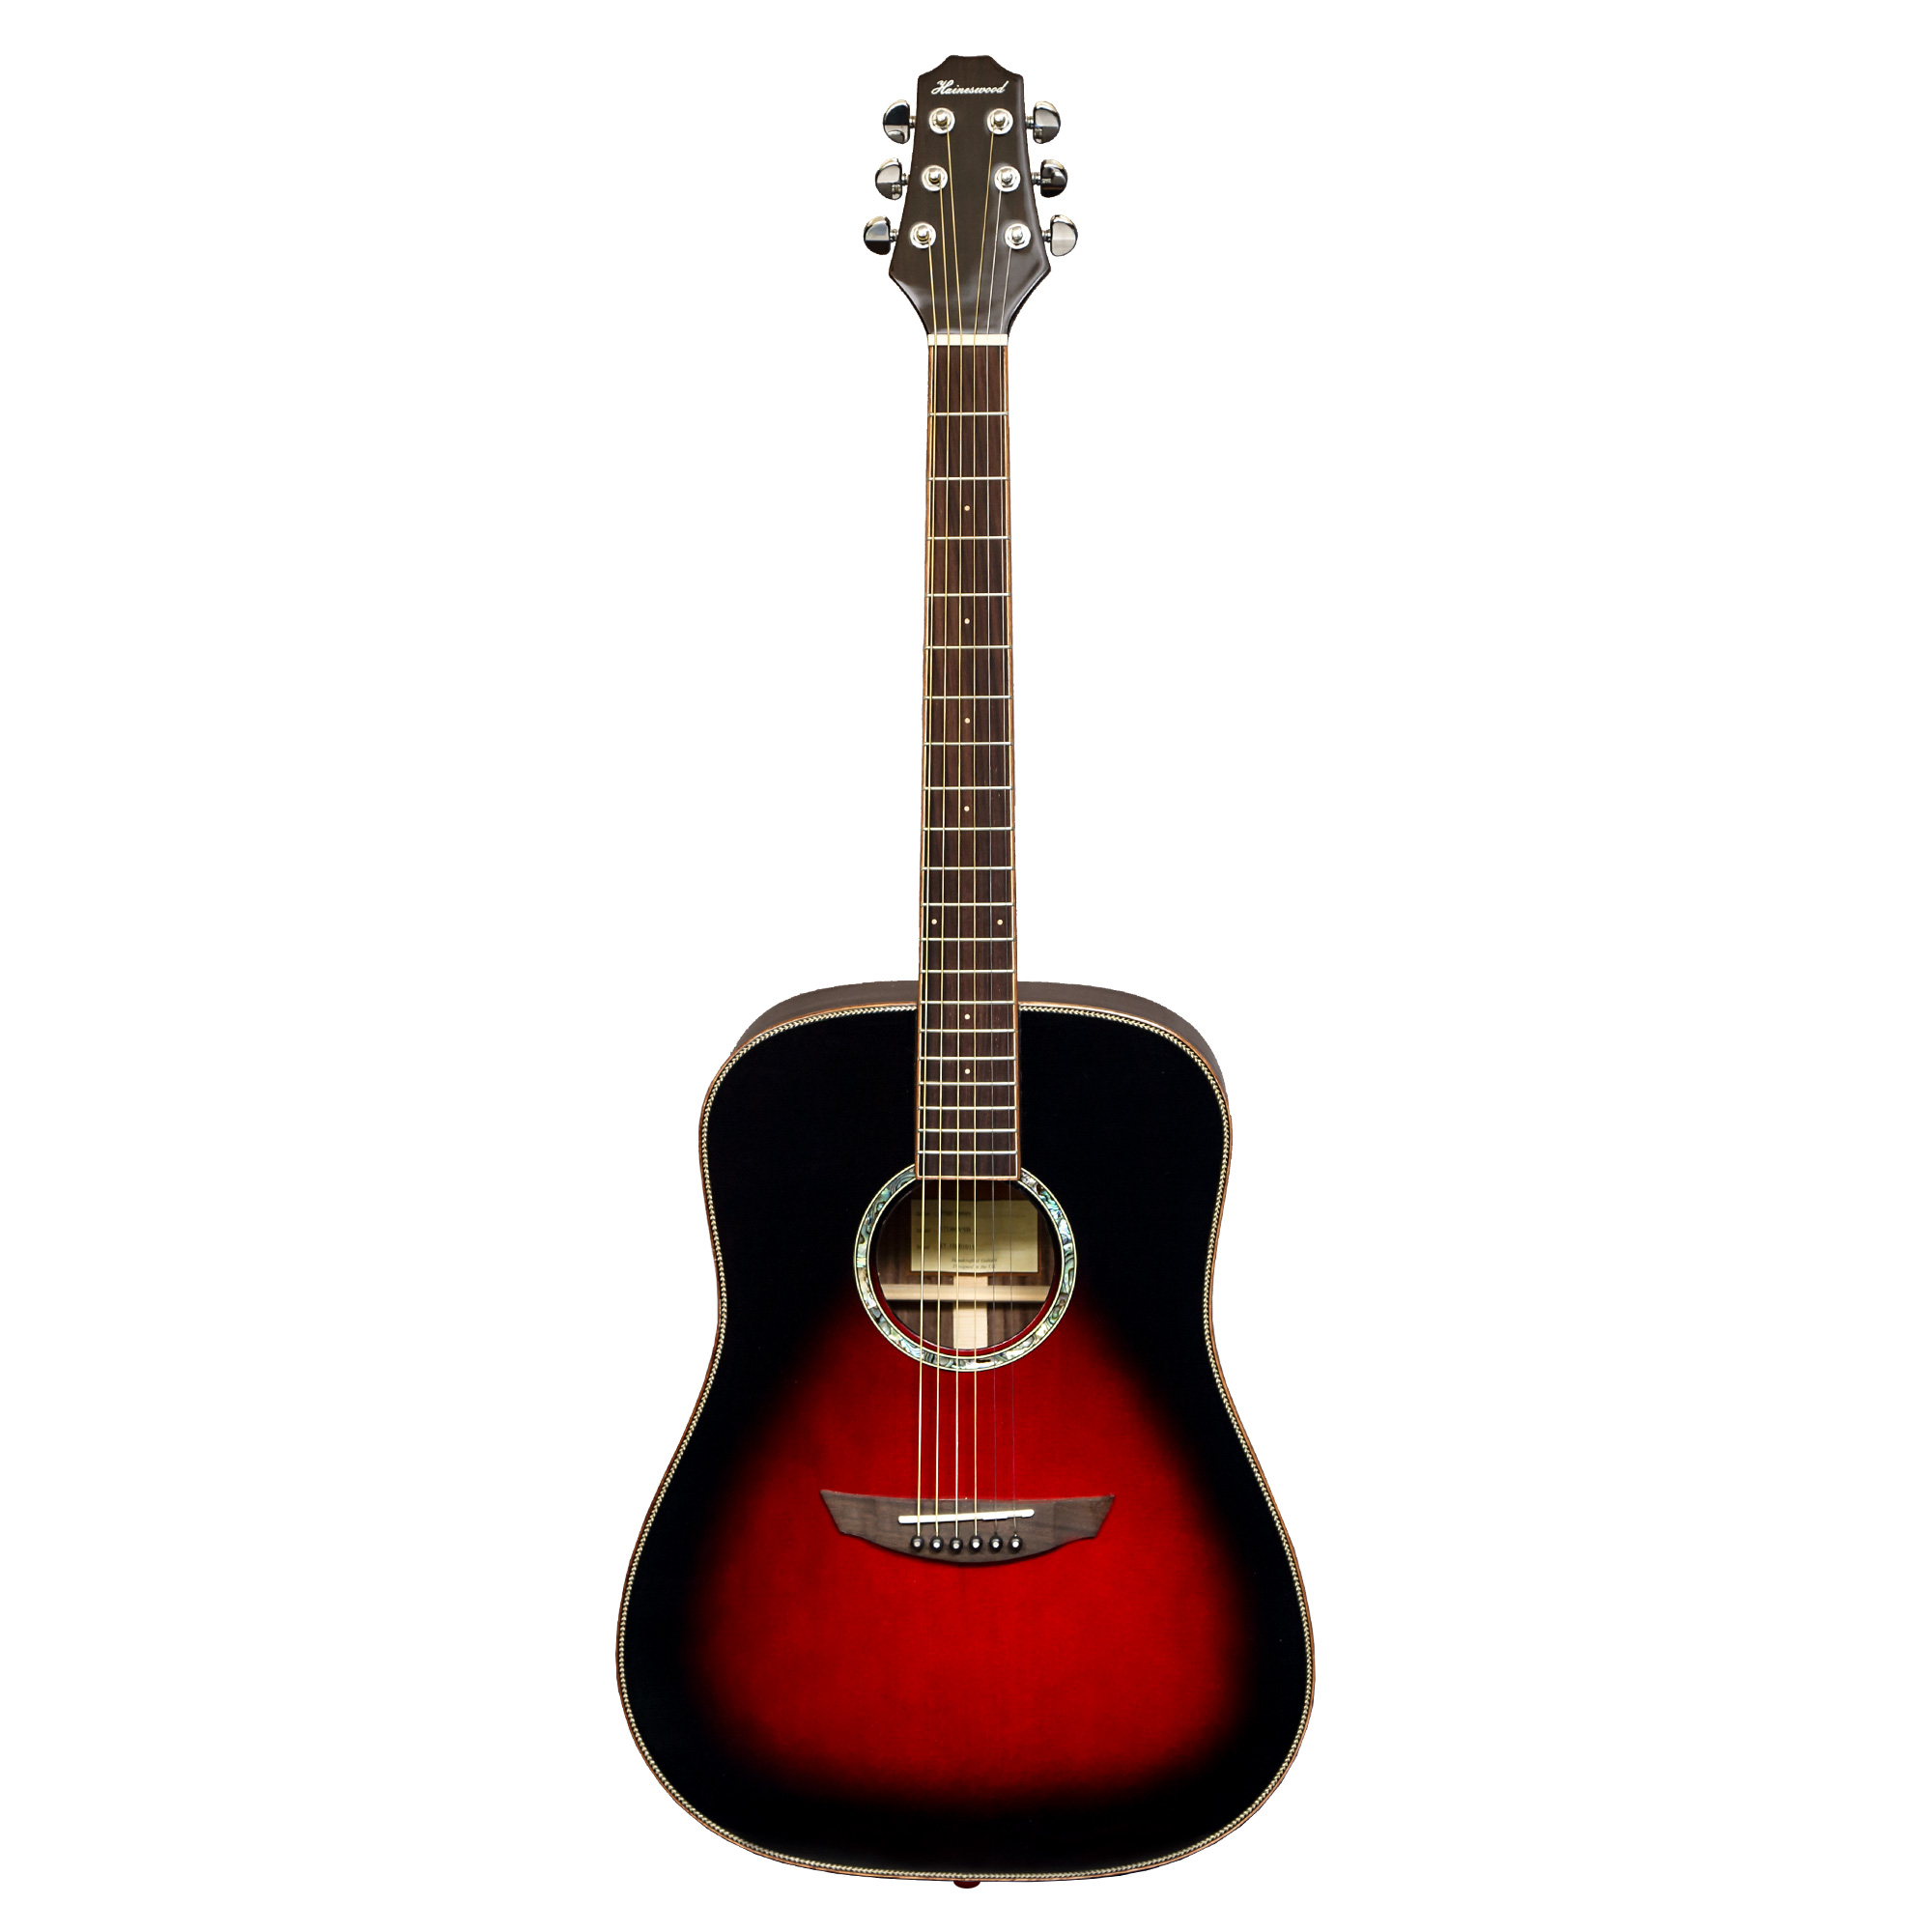 Haineswood Stage STD80VSB Dreadnought